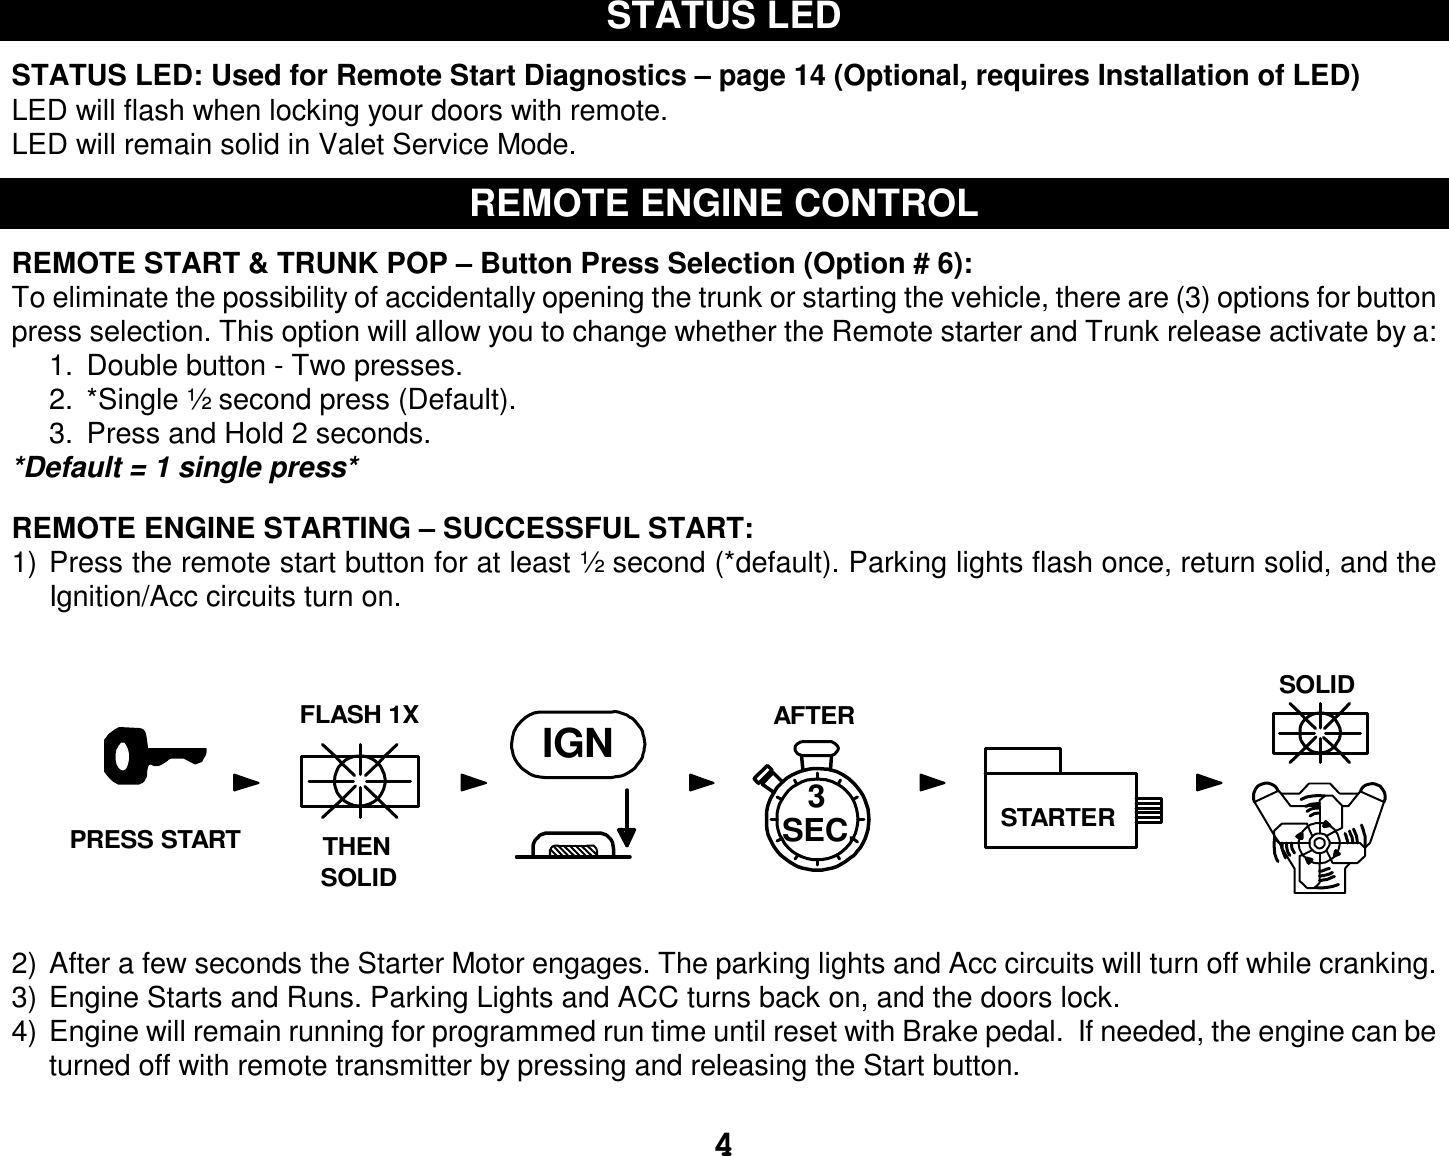  4 STATUS LED  STATUS LED: Used for Remote Start Diagnostics – page 14 (Optional, requires Installation of LED) LED will flash when locking your doors with remote.  LED will remain solid in Valet Service Mode.  REMOTE ENGINE CONTROL  REMOTE START &amp; TRUNK POP – Button Press Selection (Option # 6): To eliminate the possibility of accidentally opening the trunk or starting the vehicle, there are (3) options for button press selection. This option will allow you to change whether the Remote starter and Trunk release activate by a: 1. Double button - Two presses. 2. *Single ½ second press (Default). 3. Press and Hold 2 seconds. *Default = 1 single press*  REMOTE ENGINE STARTING – SUCCESSFUL START: 1) Press the remote start button for at least ½ second (*default). Parking lights flash once, return solid, and the Ignition/Acc circuits turn on. 2) After a few seconds the Starter Motor engages. The parking lights and Acc circuits will turn off while cranking. 3) Engine Starts and Runs. Parking Lights and ACC turns back on, and the doors lock. 4) Engine will remain running for programmed run time until reset with Brake pedal.  If needed, the engine can be turned off with remote transmitter by pressing and releasing the Start button.  AFTERIGN3STARTERTHENFLASH 1XSOLIDSOLIDSEC.PRESS START